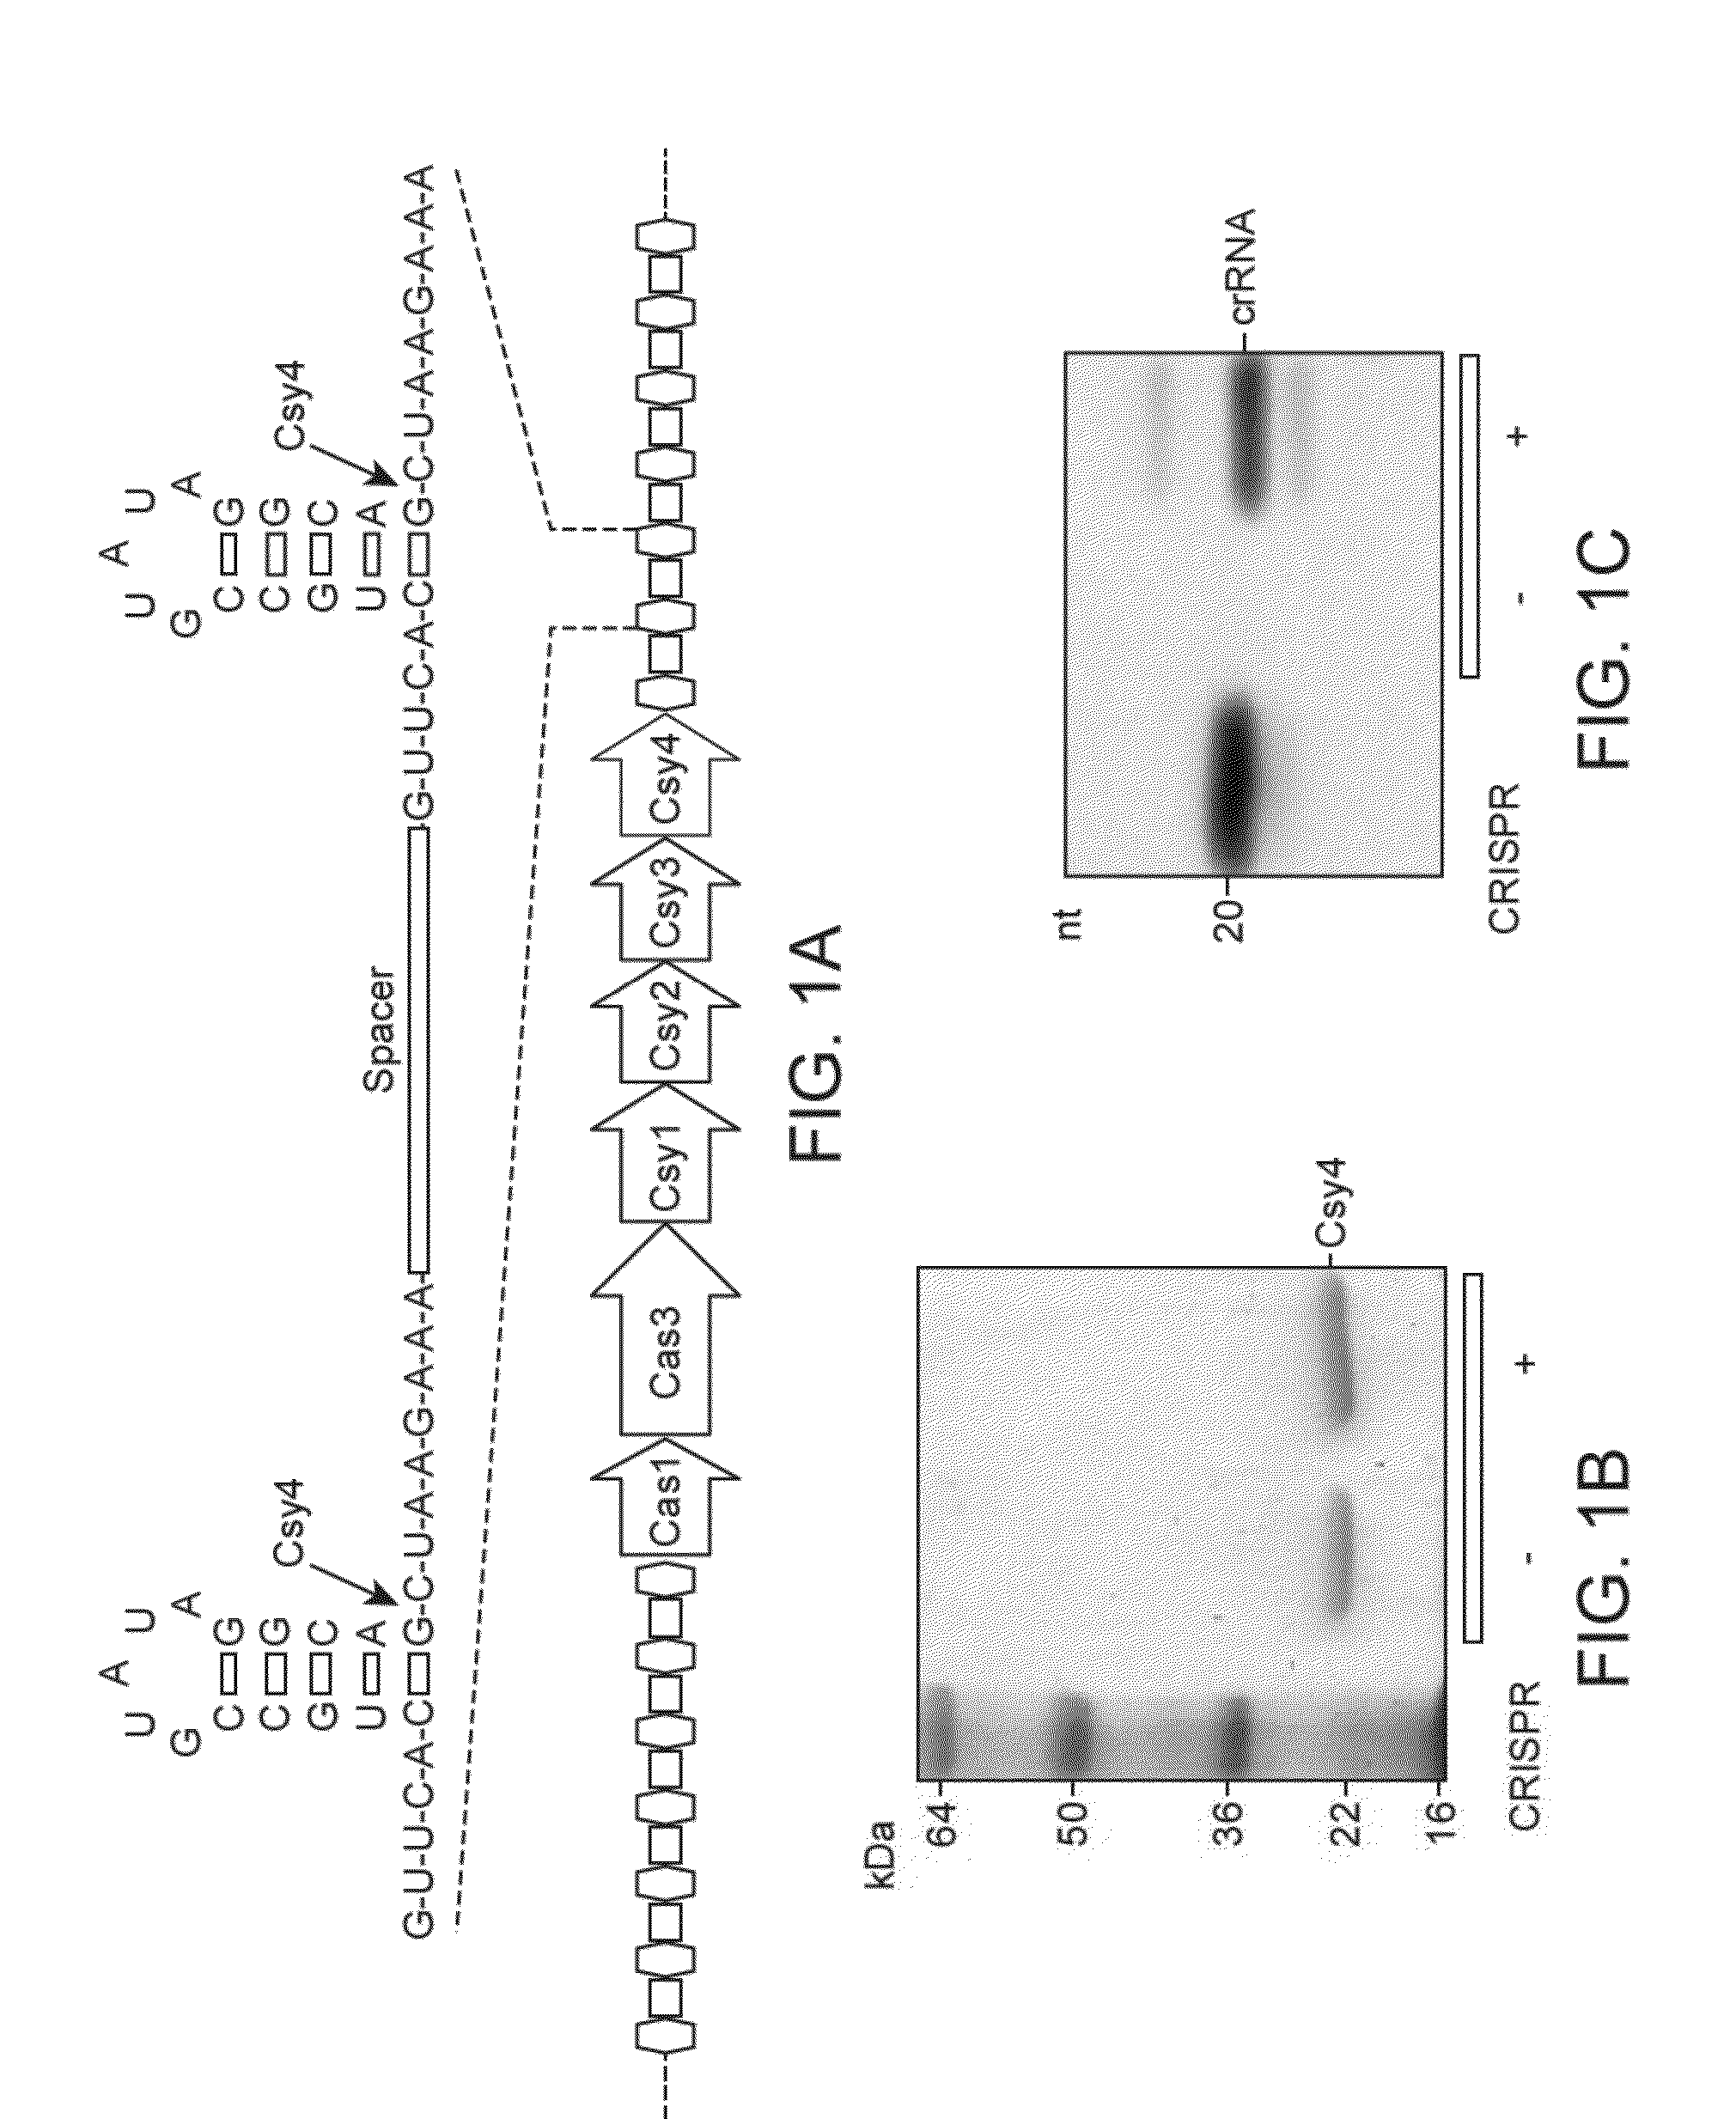 Endoribonuclease compositions and methods of use thereof